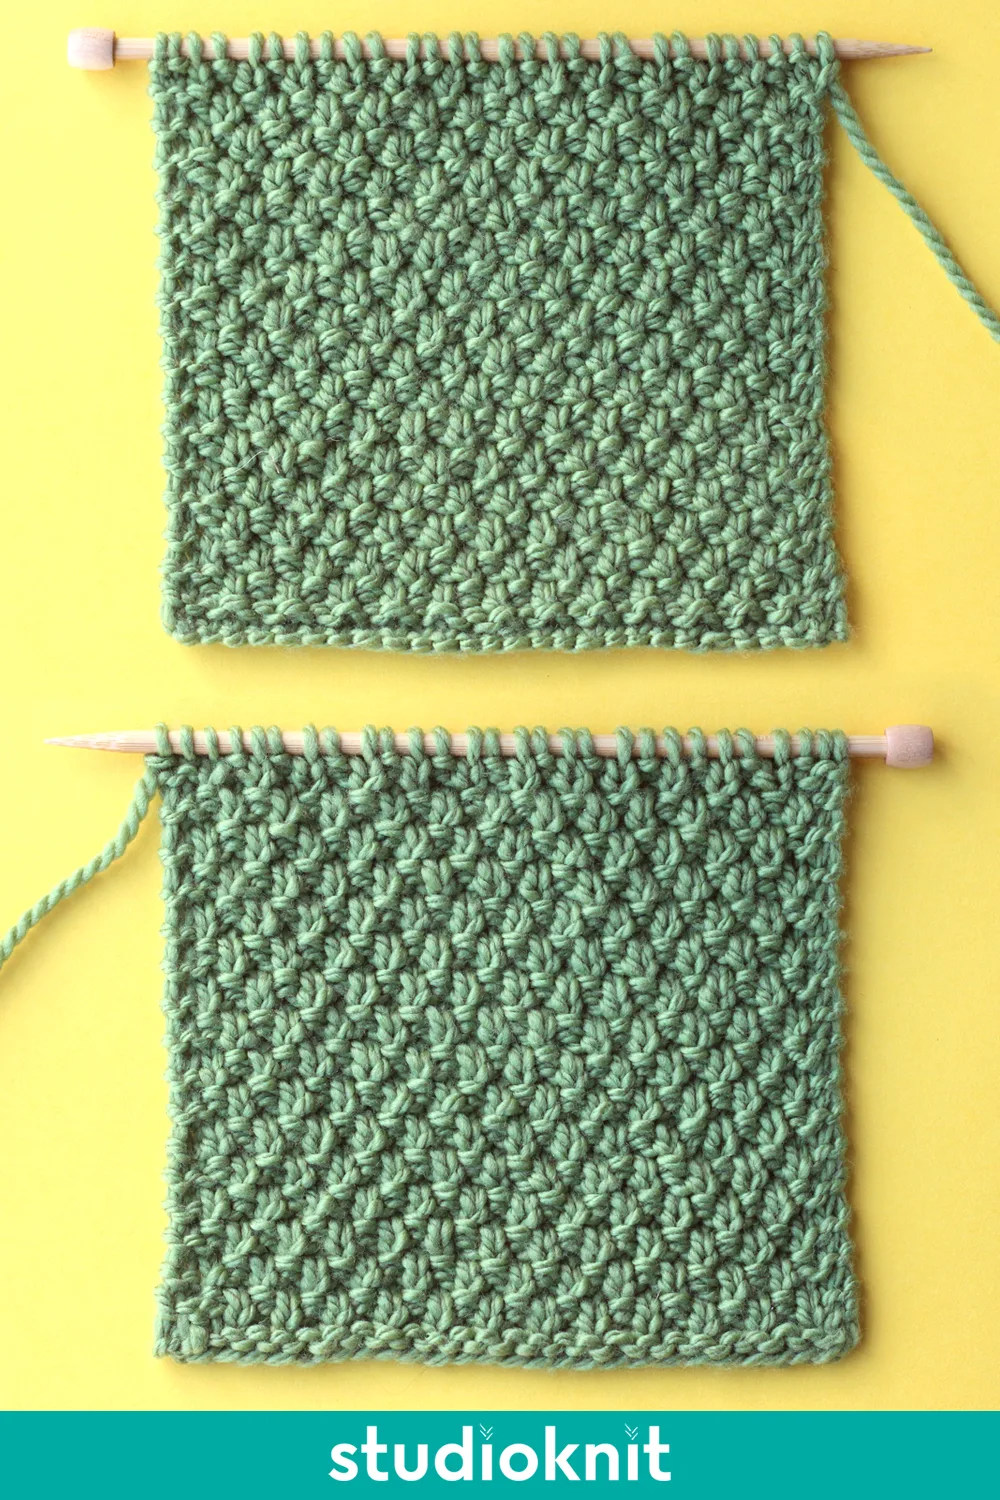 Right and wrong sides of the Irish Moss Knit Stitch Pattern in green color yarn on knitting needle.